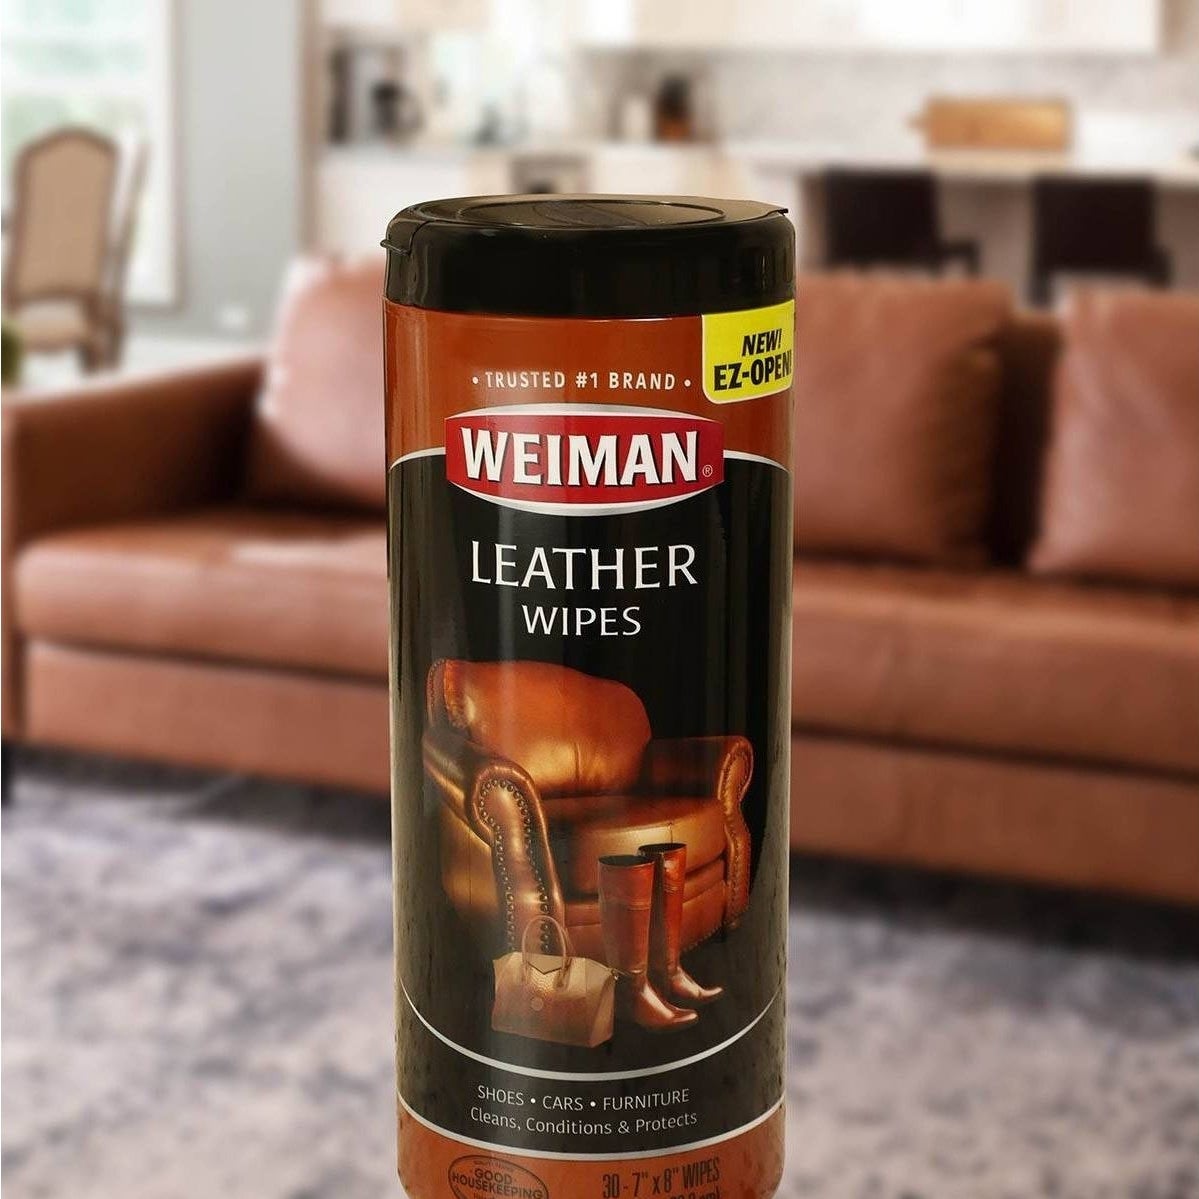 the black and brown container of wipes in front of a leather couch